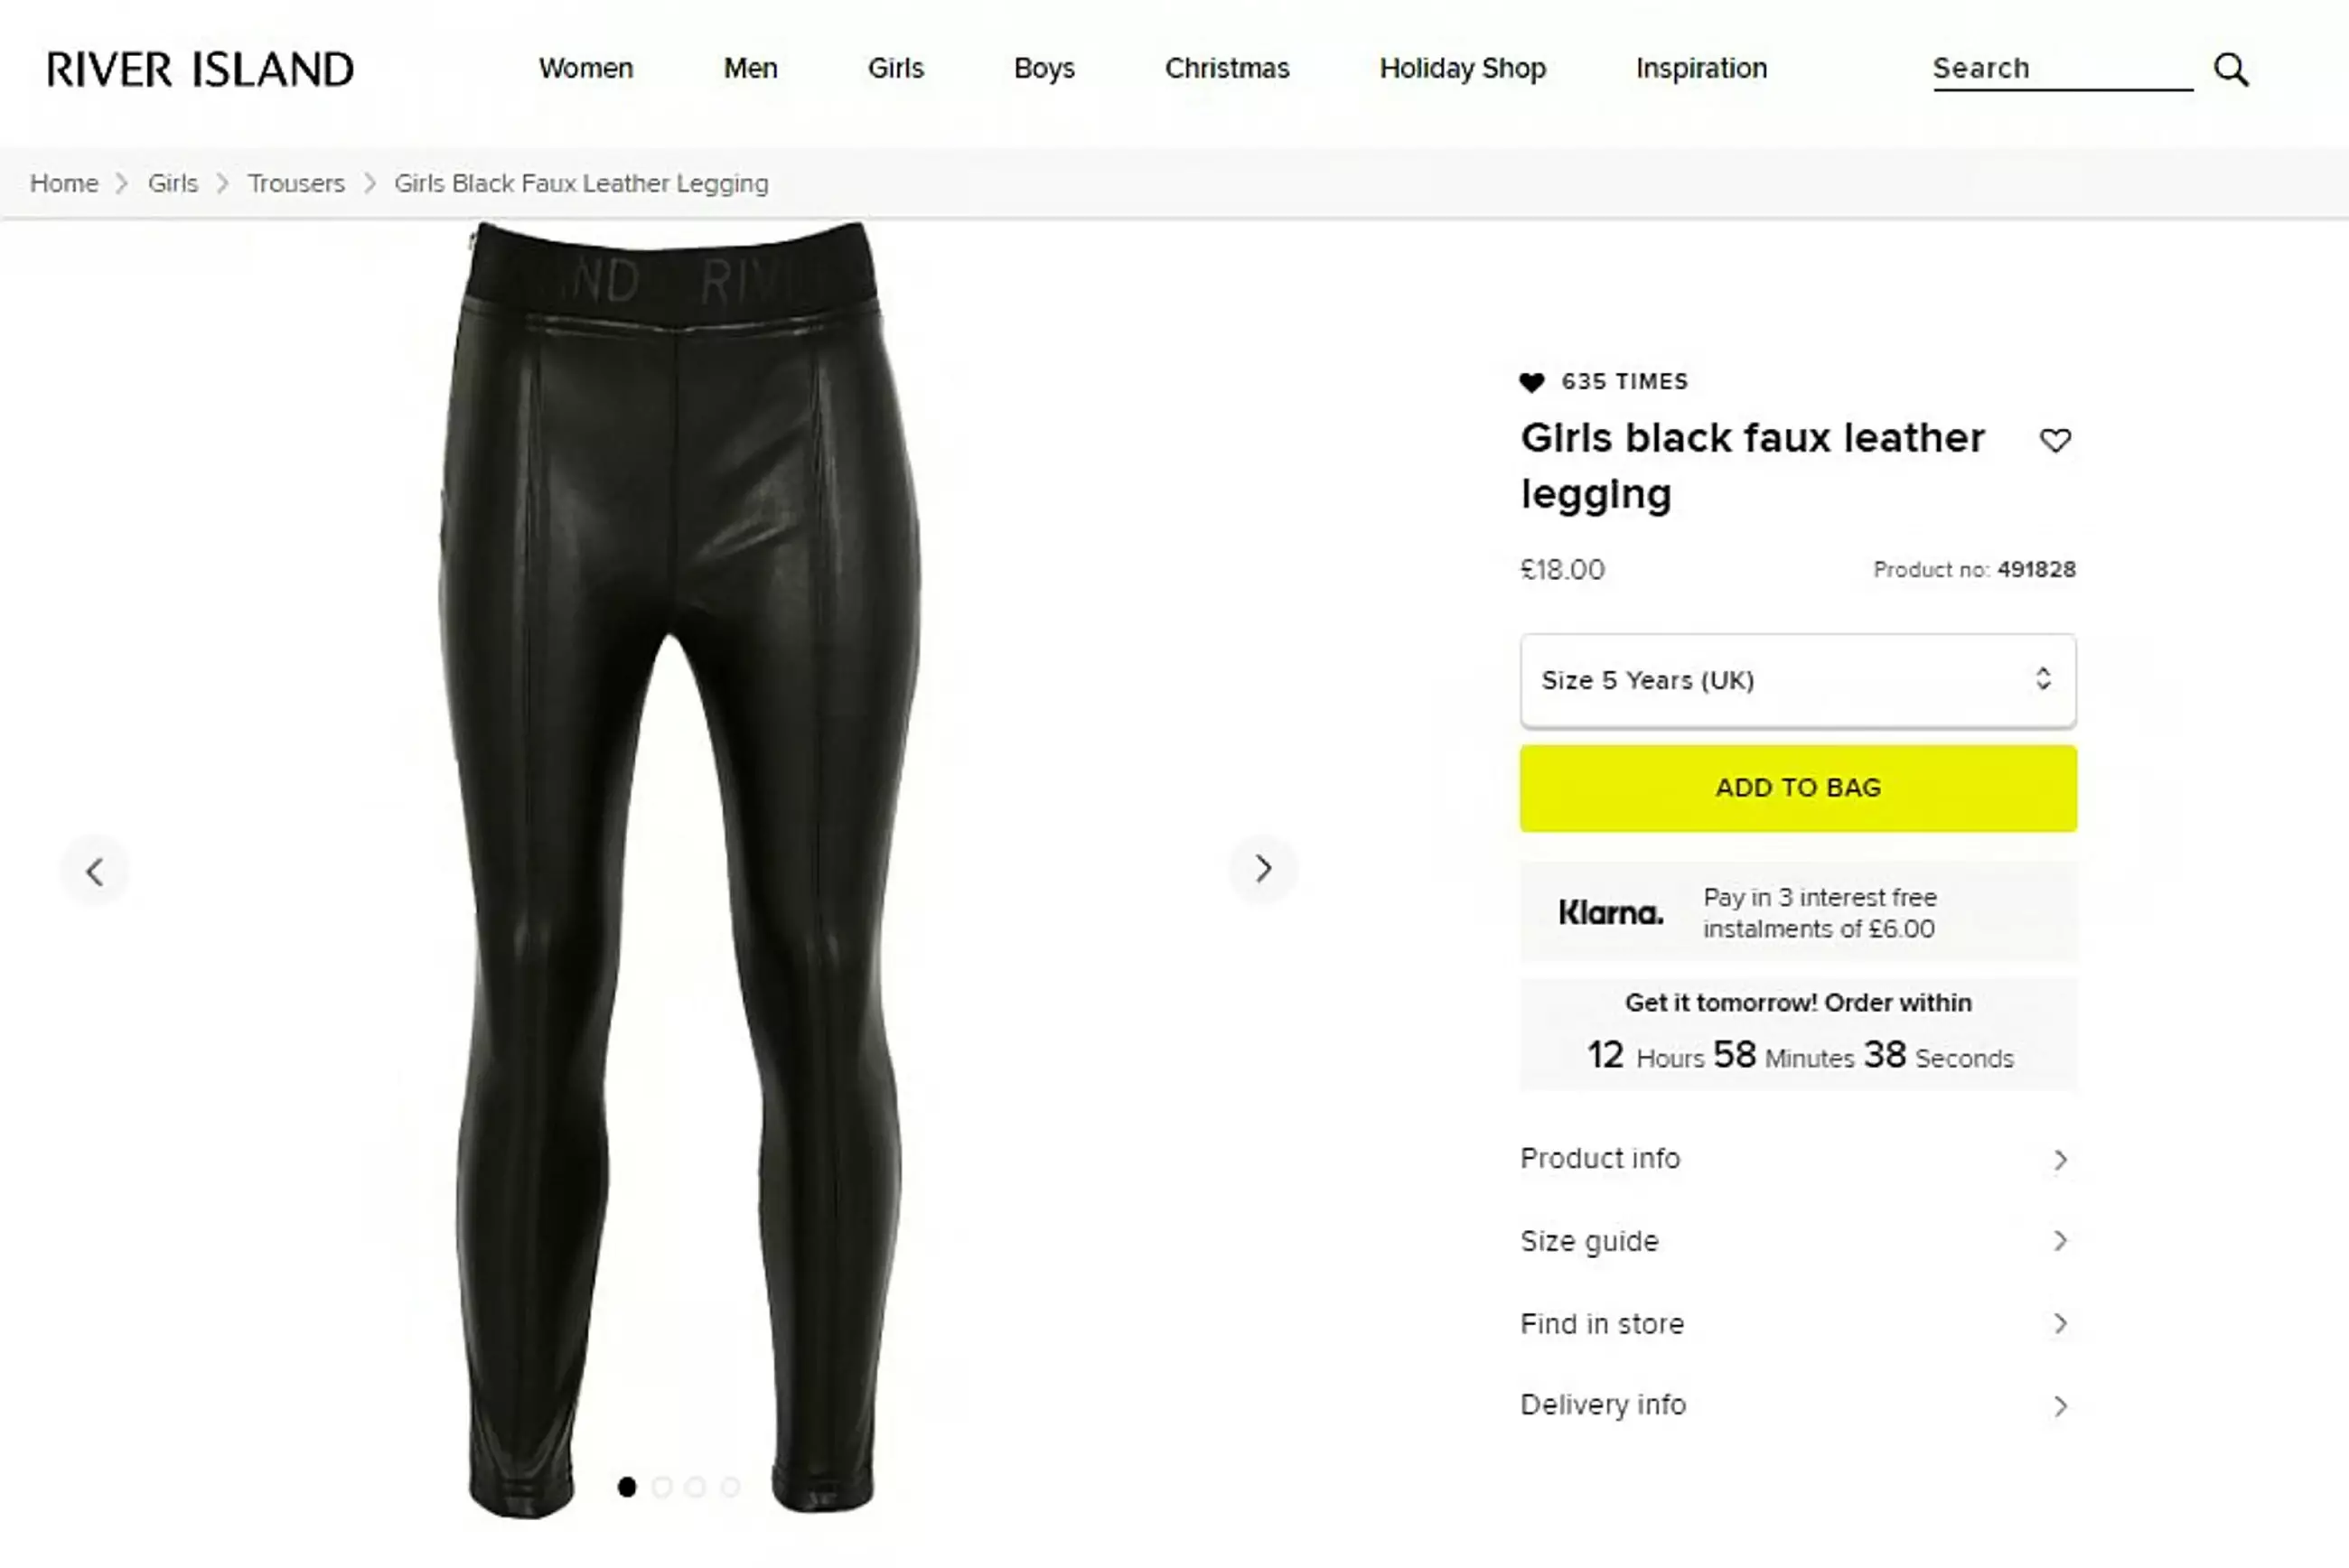 River Island's faux leather trousers are available for children aged 5 to 12 (